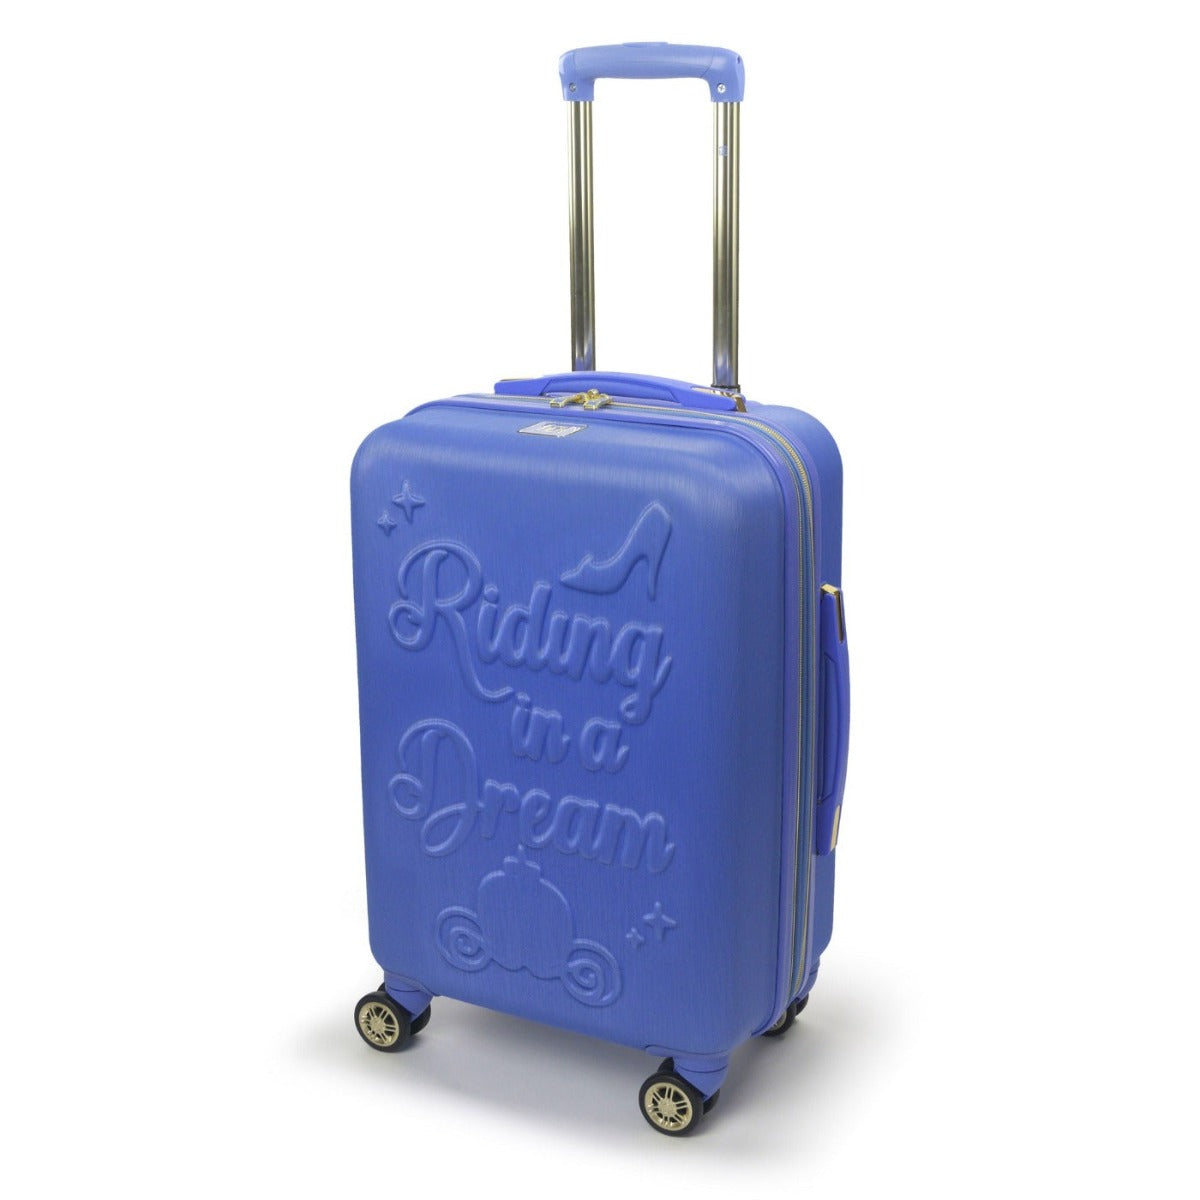 Ful Load Rider Spinner Rolling Luggage, Cobalt, 29